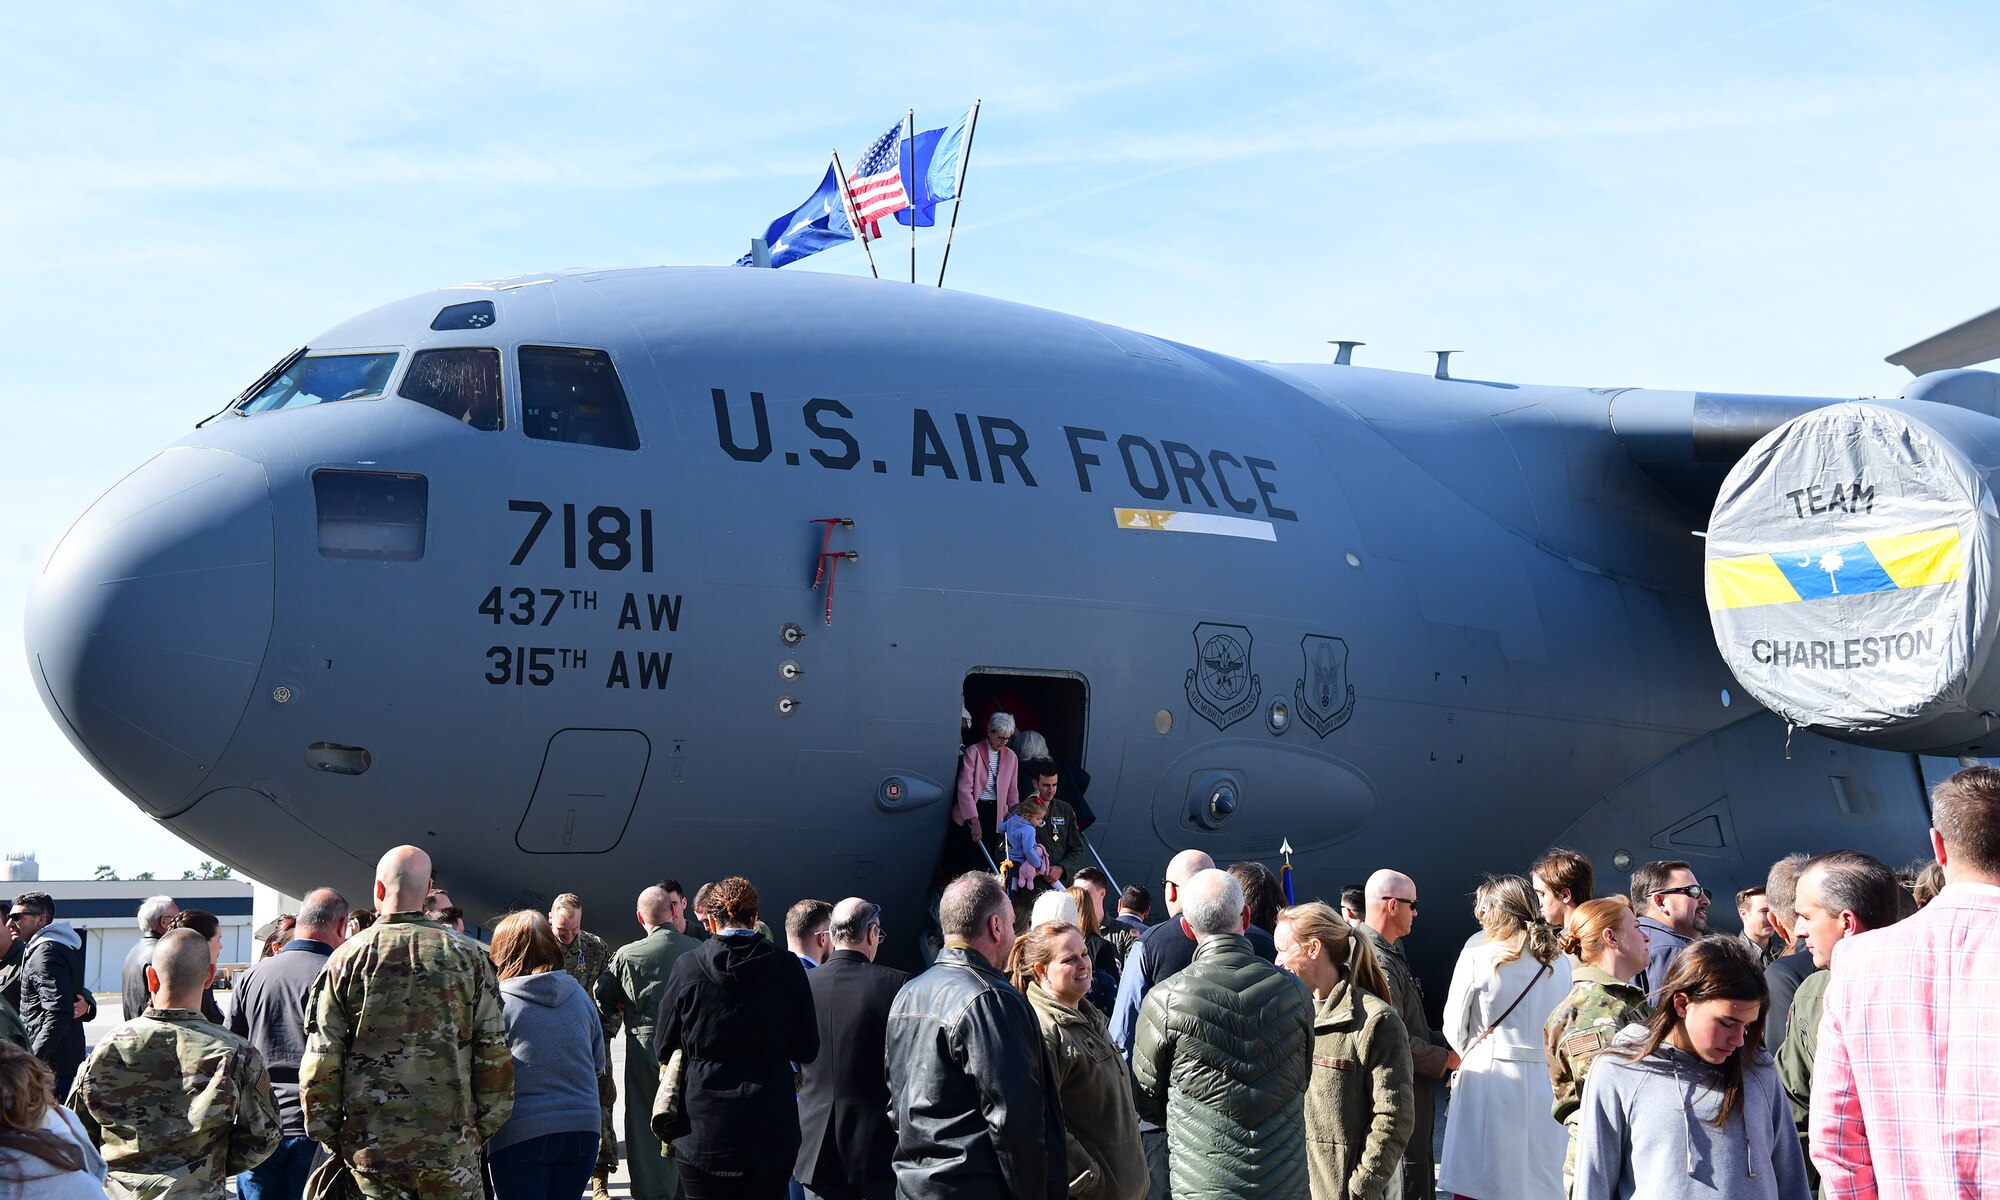 People view a C-17 aircraft.